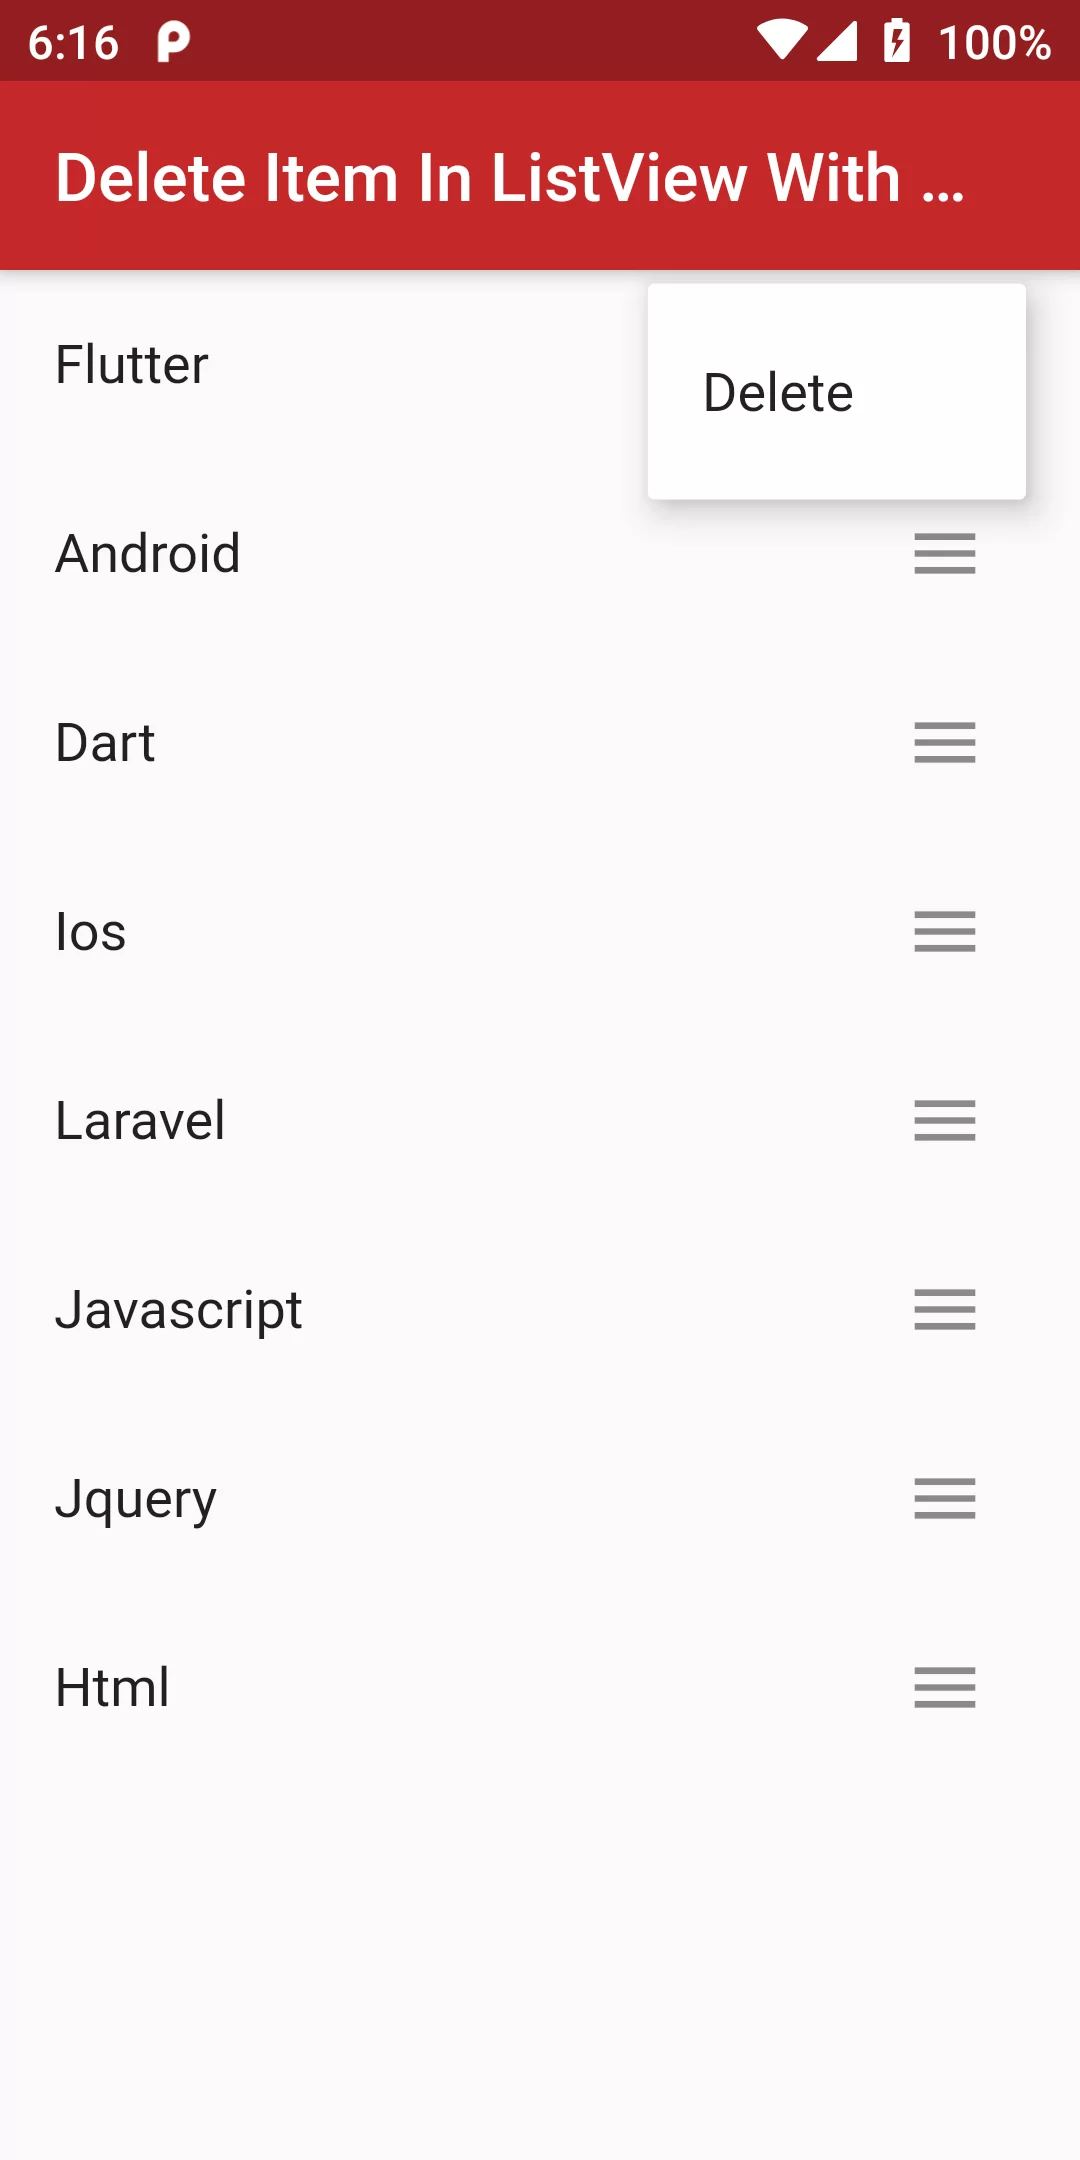 How To Delete Item In Listview With Popup Menu Button In Flutter